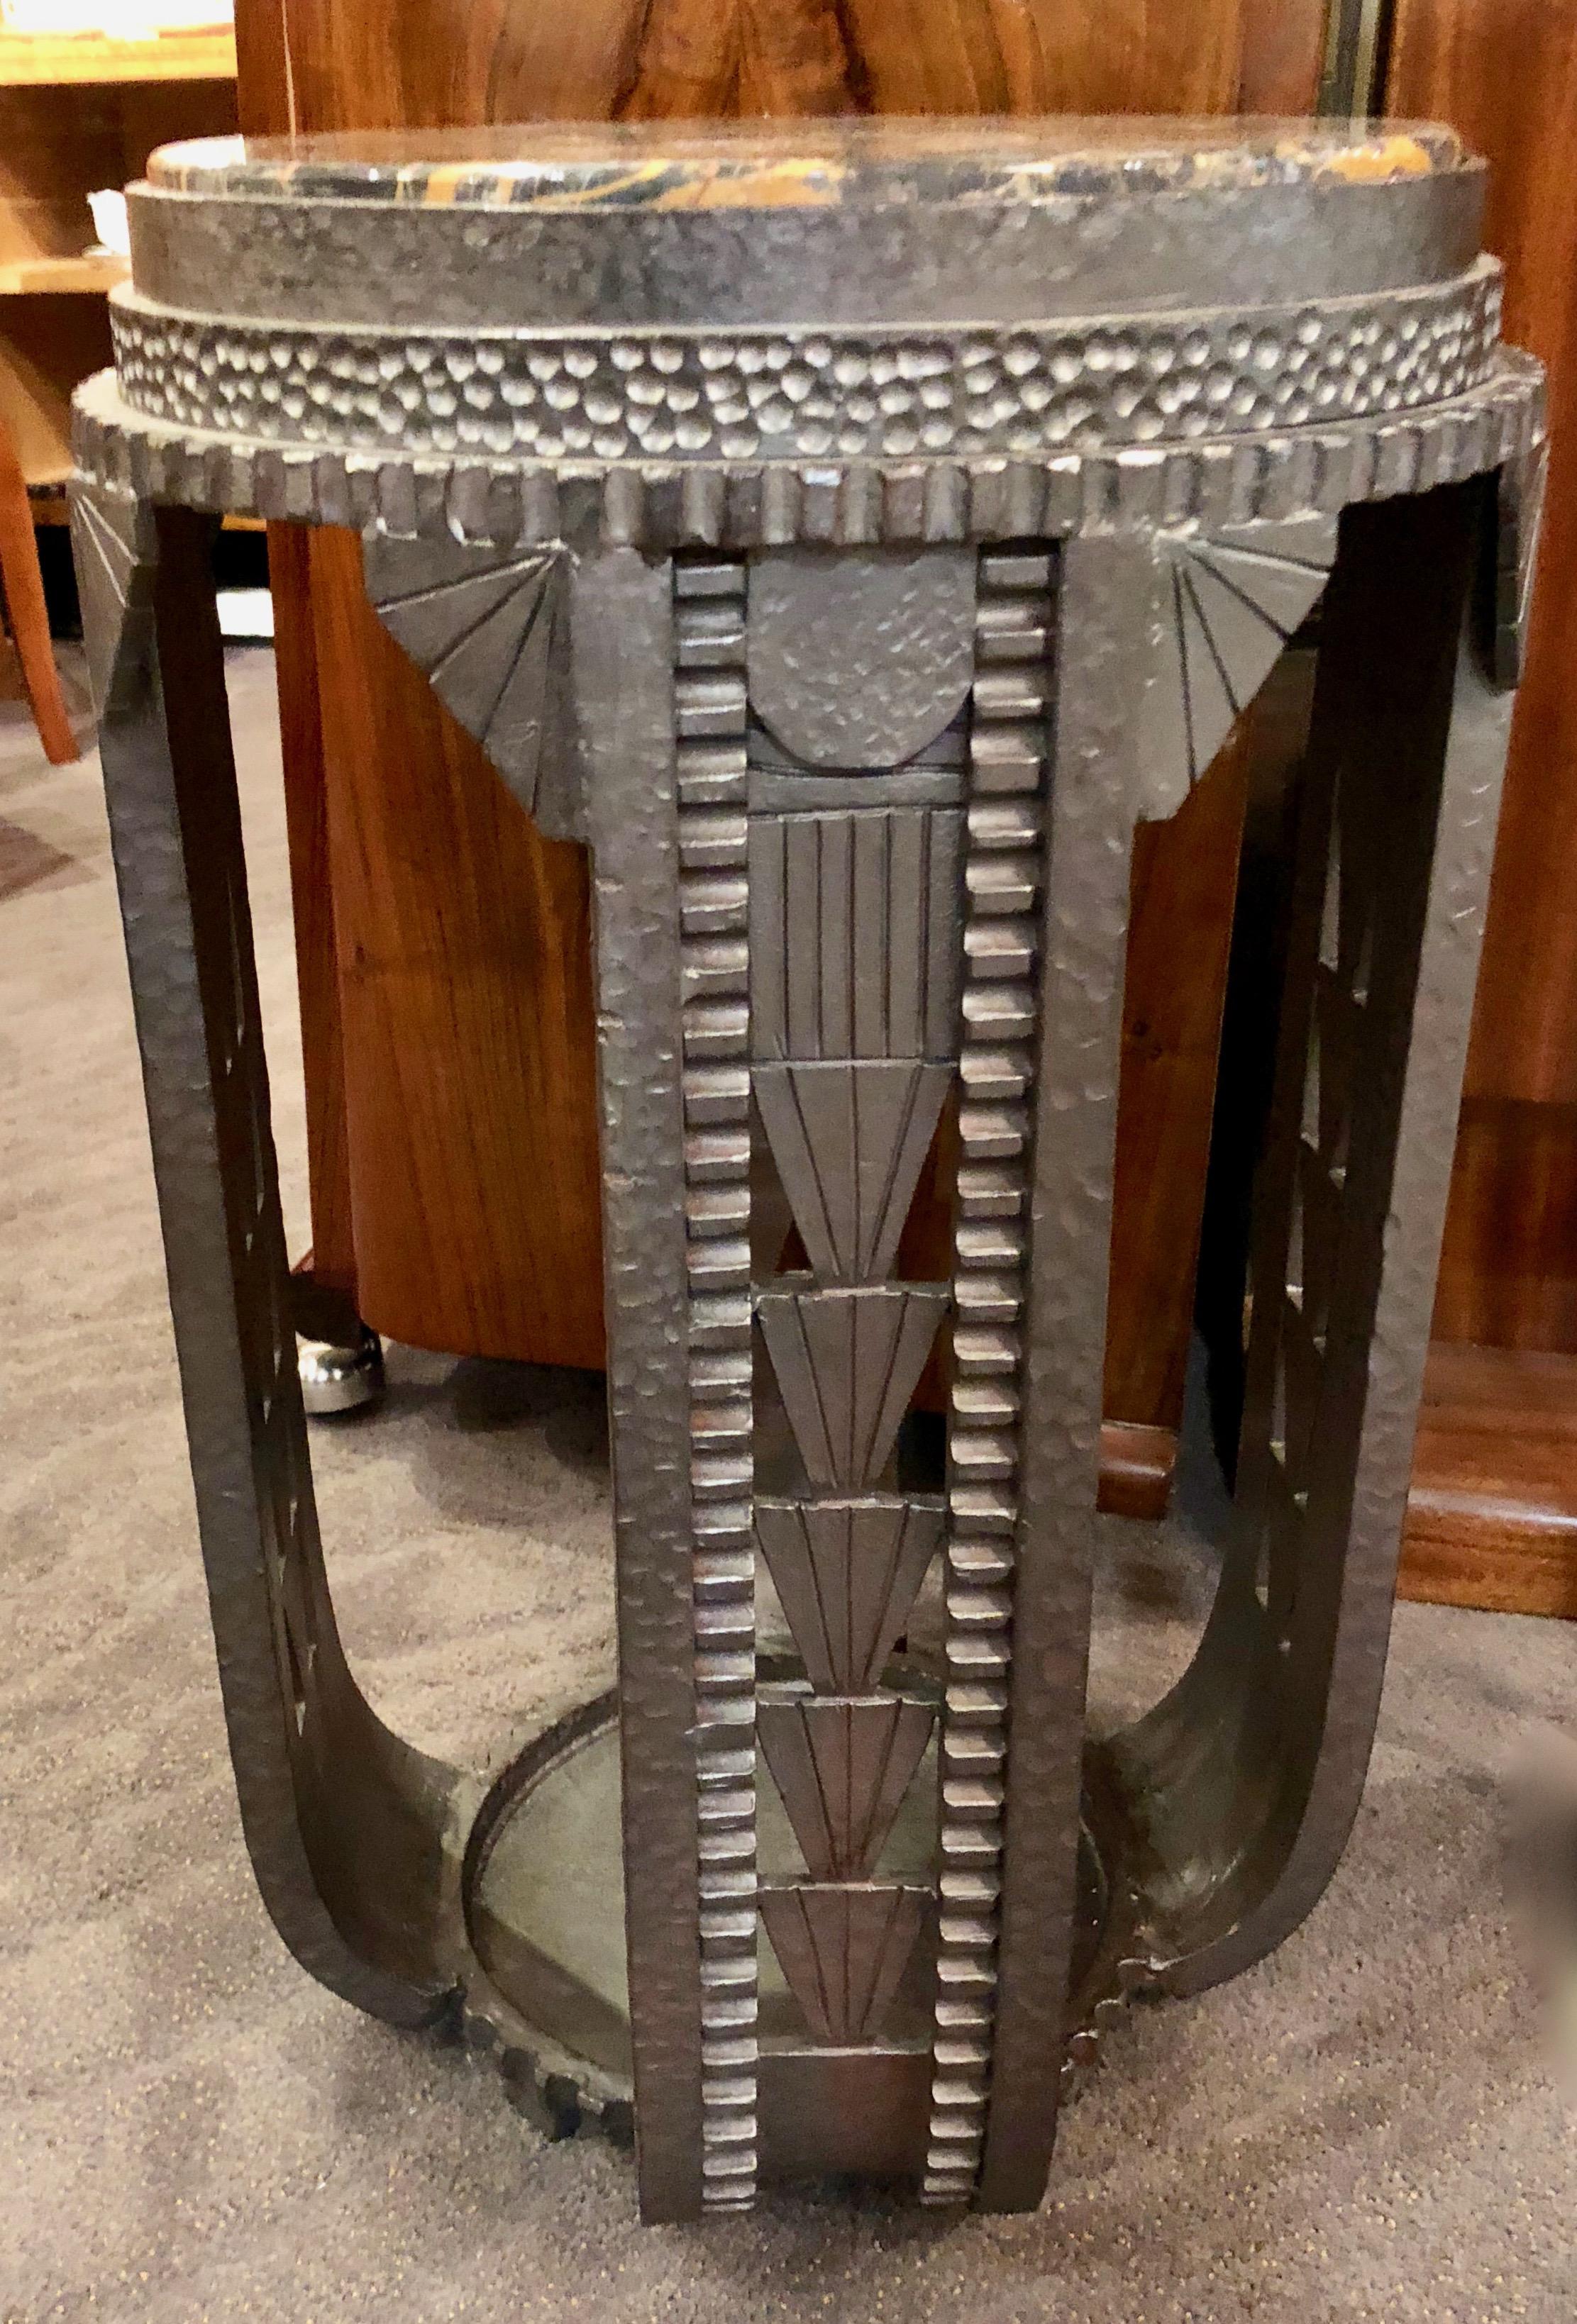 Here is a wonderful table, custom-made for our shop. Would make a great side table for a sofa, perfect in-between a couple of glazed French leather club chairs or display of your favourite statue. The color or patina is a deep reddish grey with